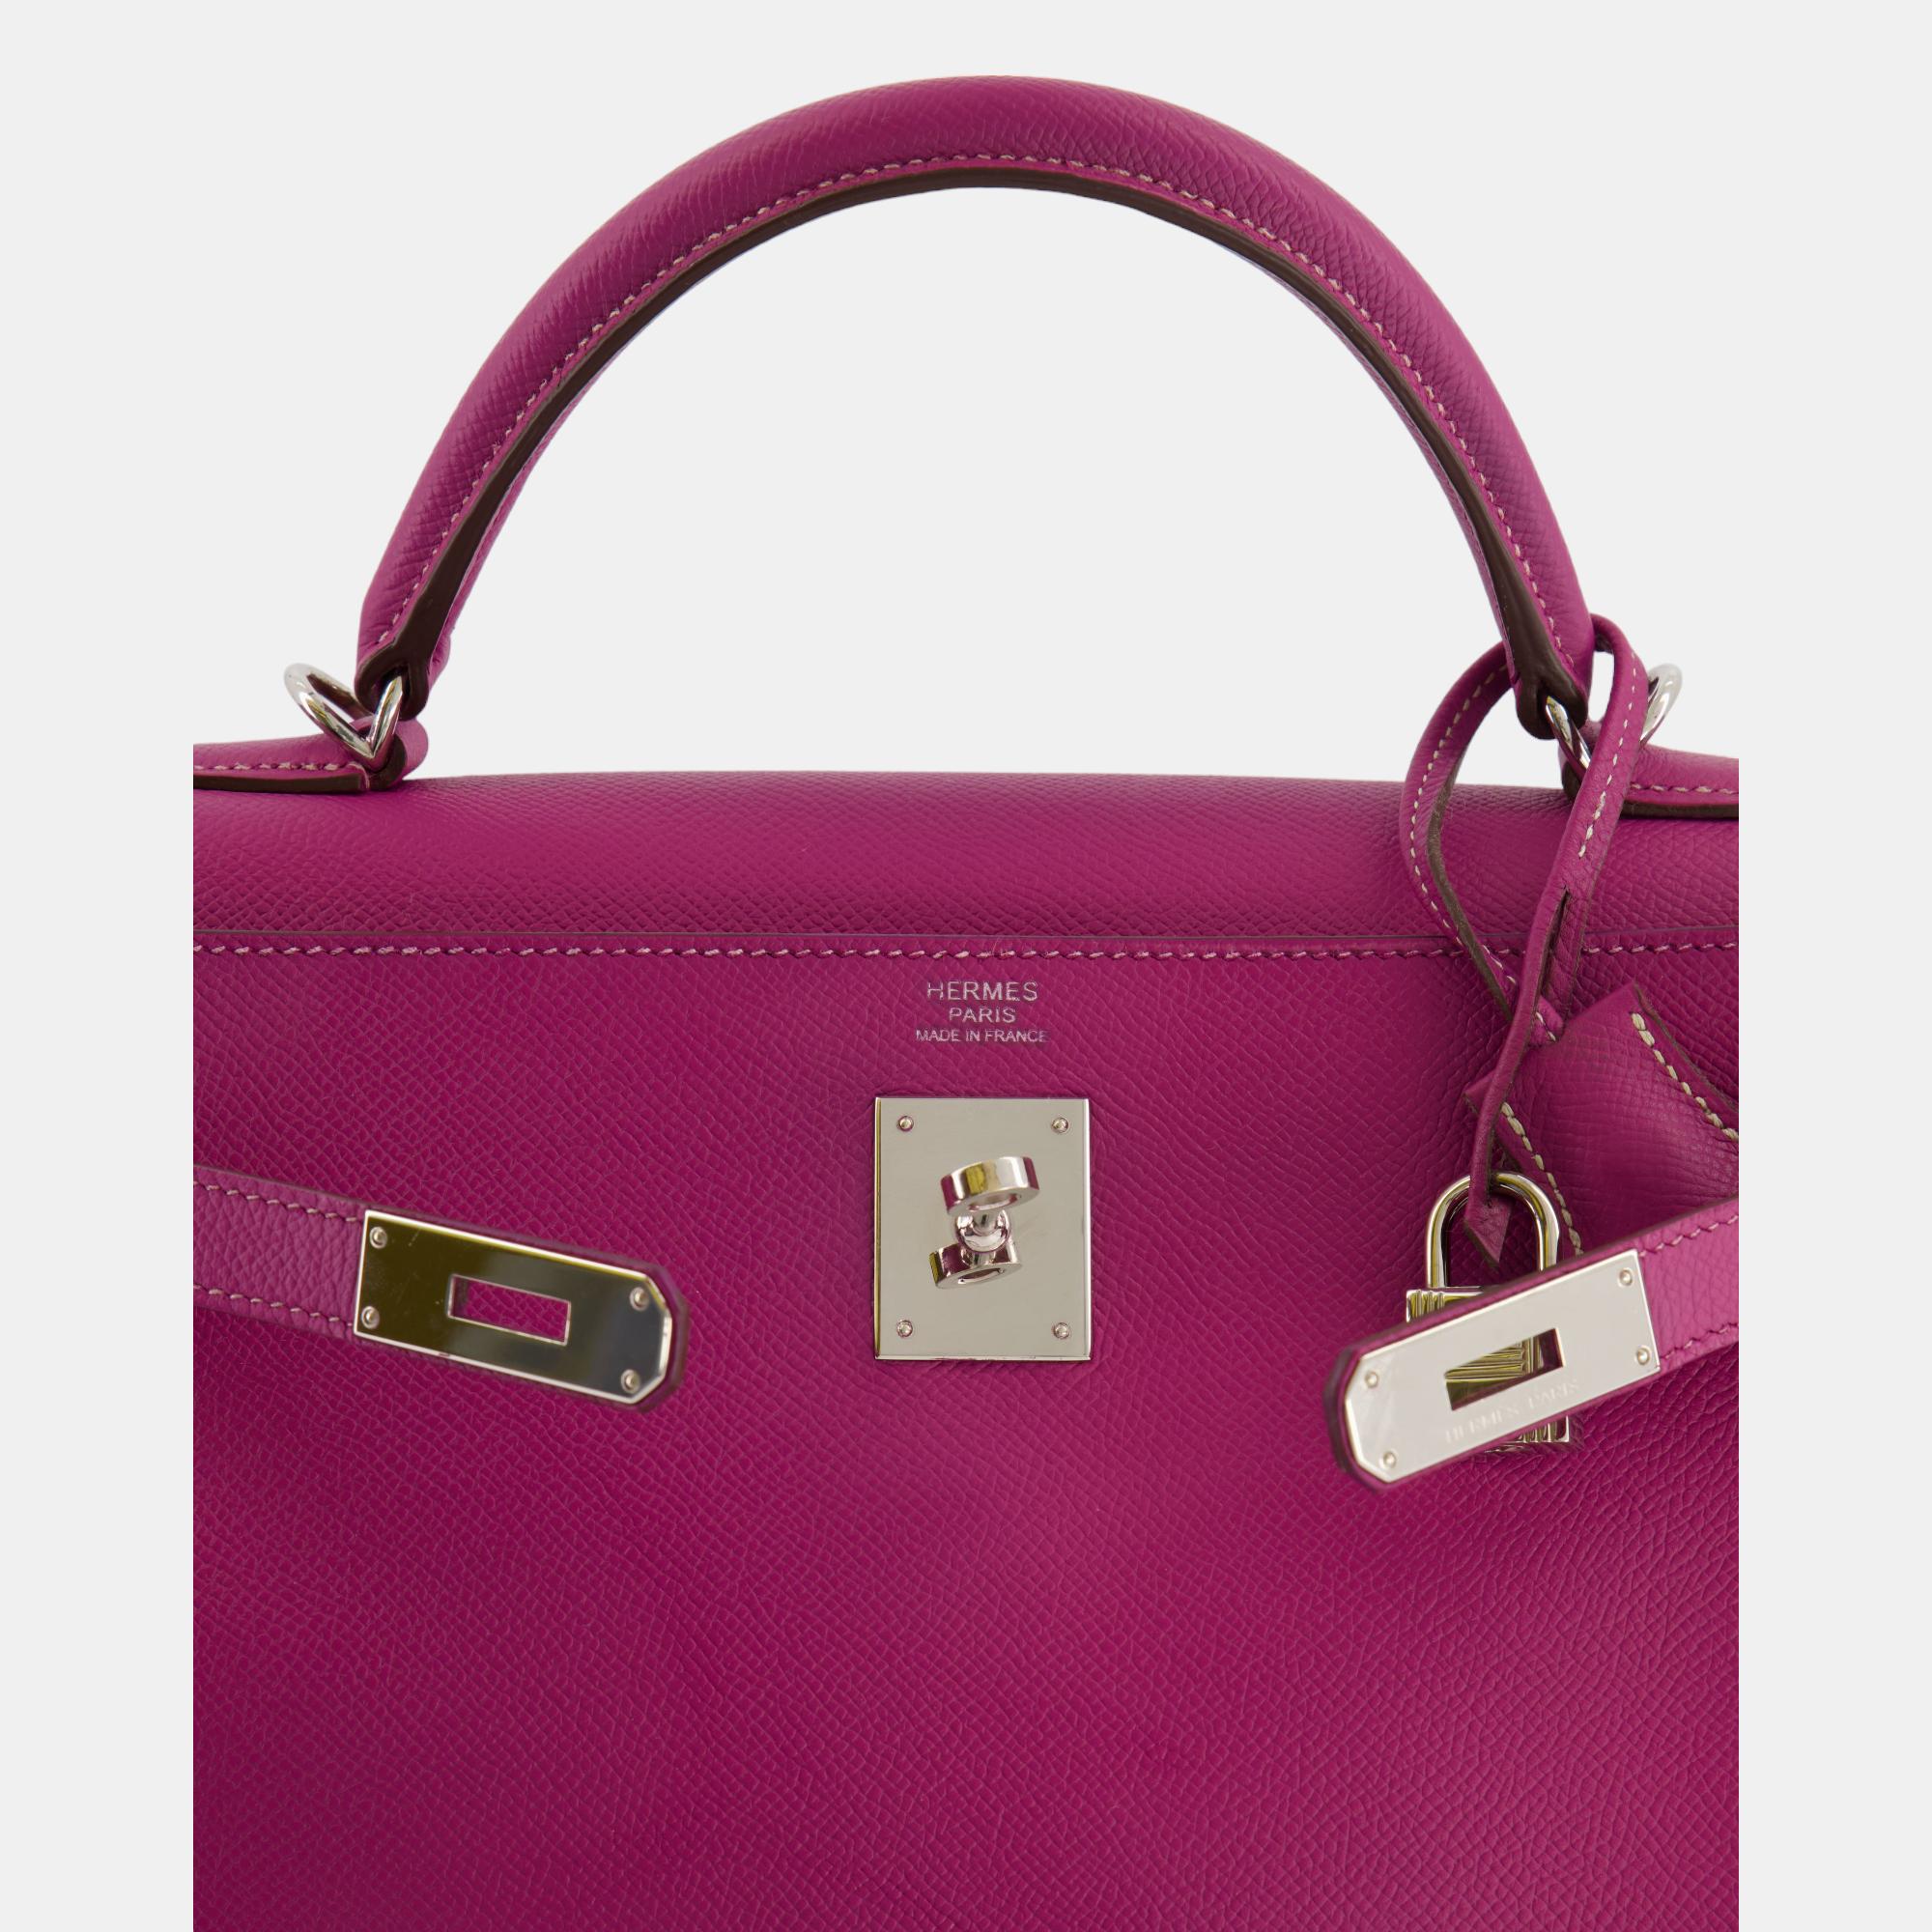 Hermes Candy Kelly Bag 32cm Retourne In Tosca Epsom Leather And Rose Tyrien Interior With Palladium Hardware